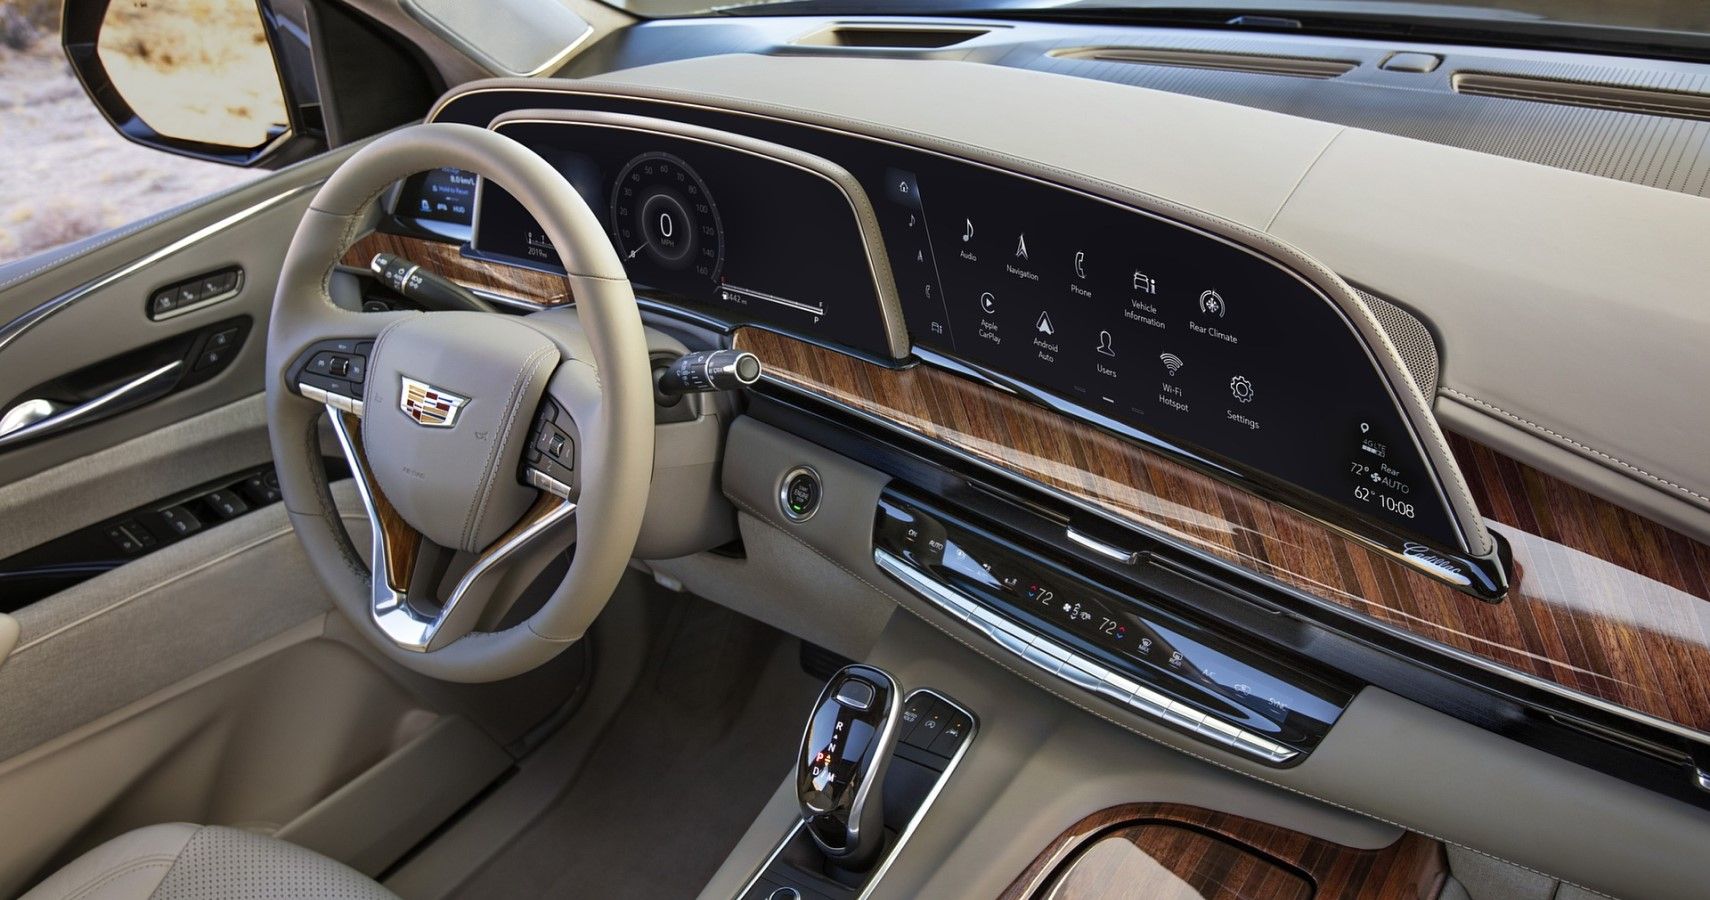 2021 Cadillac Escalade curved OLED-displays layout